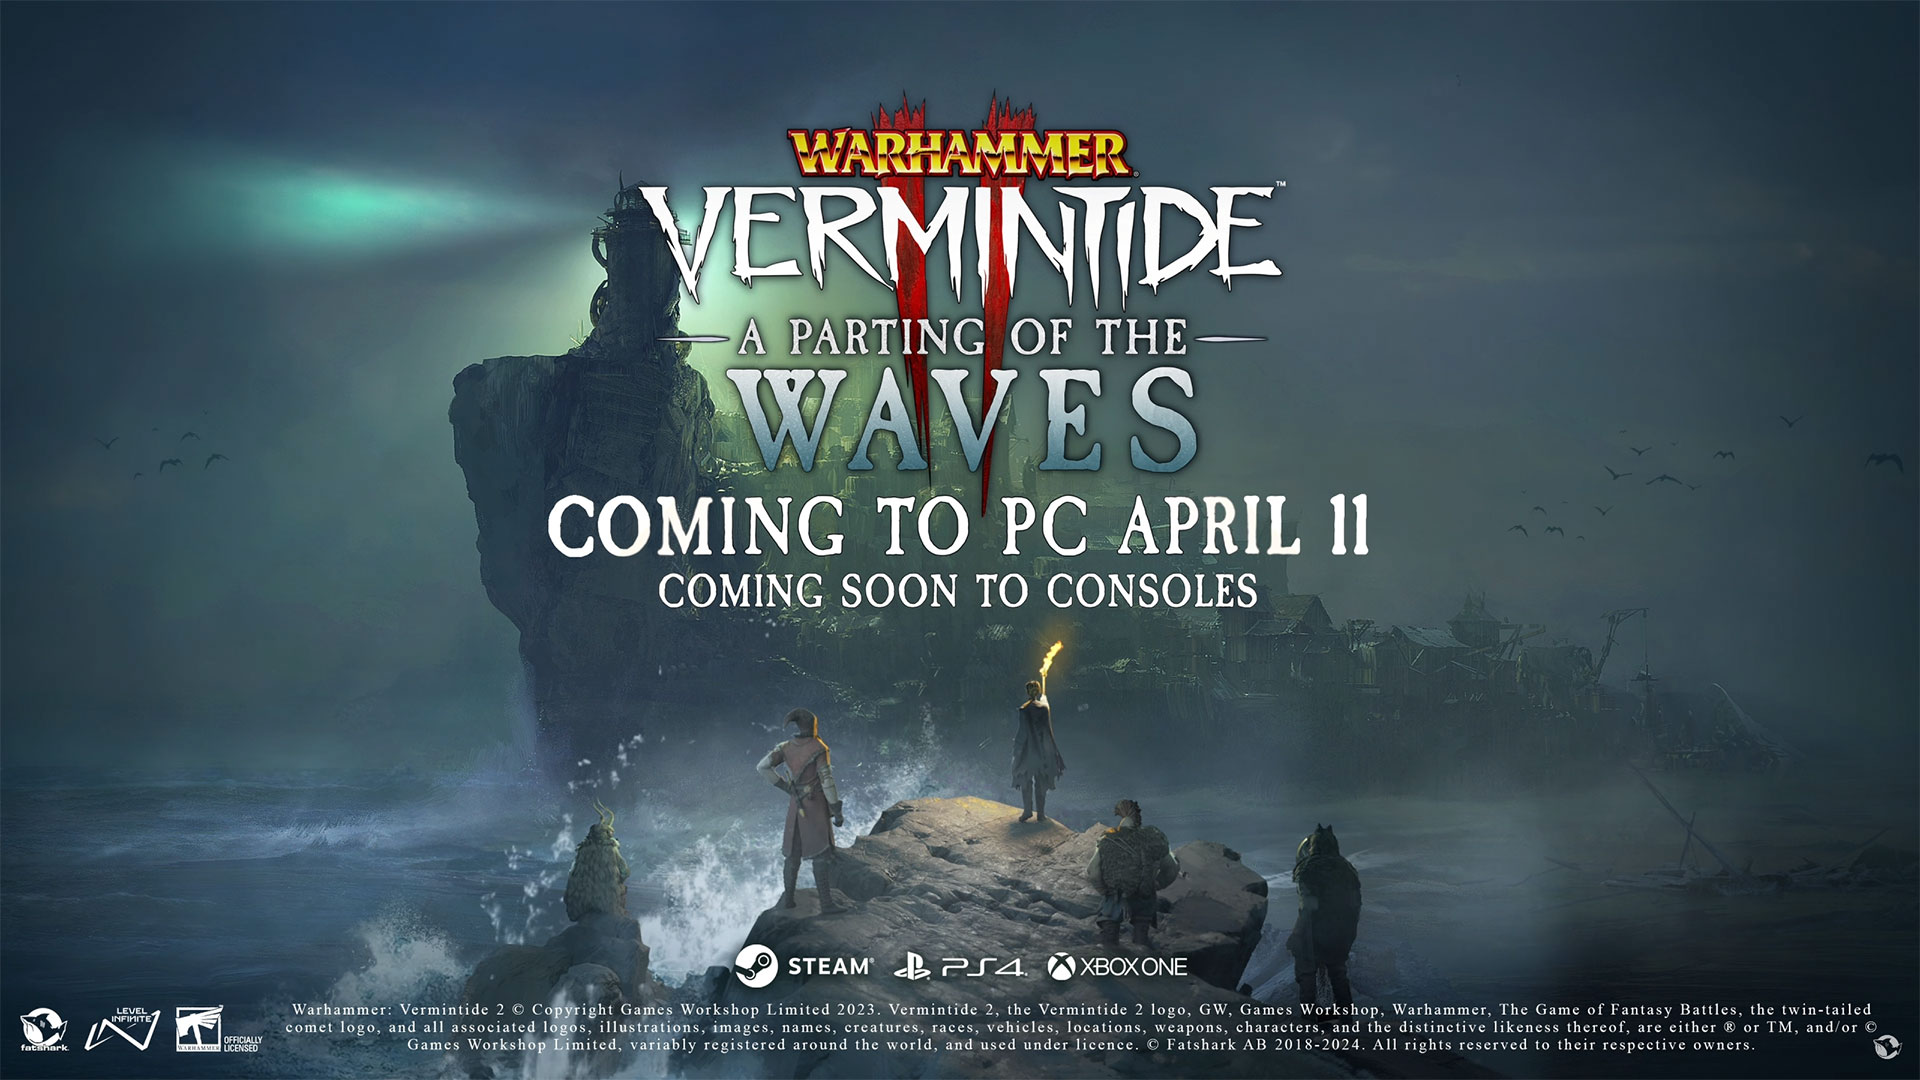 Warhammer: Vermintide 2 has announced a free update called A Parting of the Waves